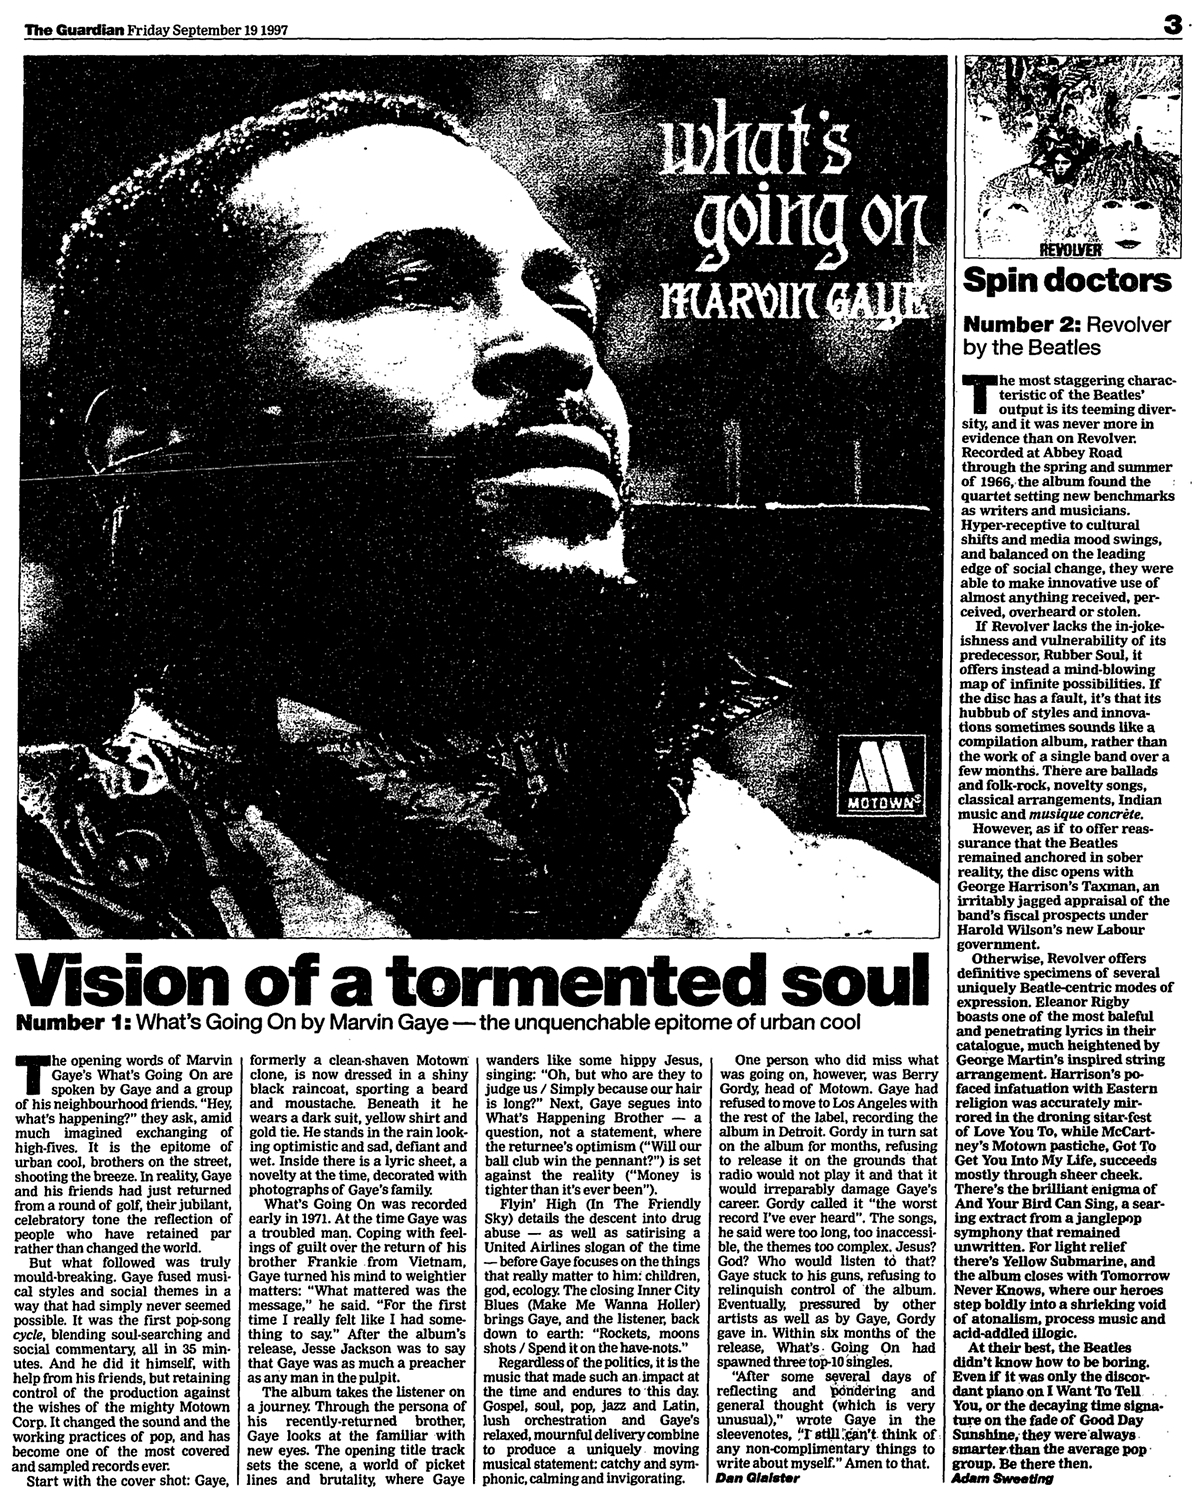 Marvin Gaye, 30 years on.